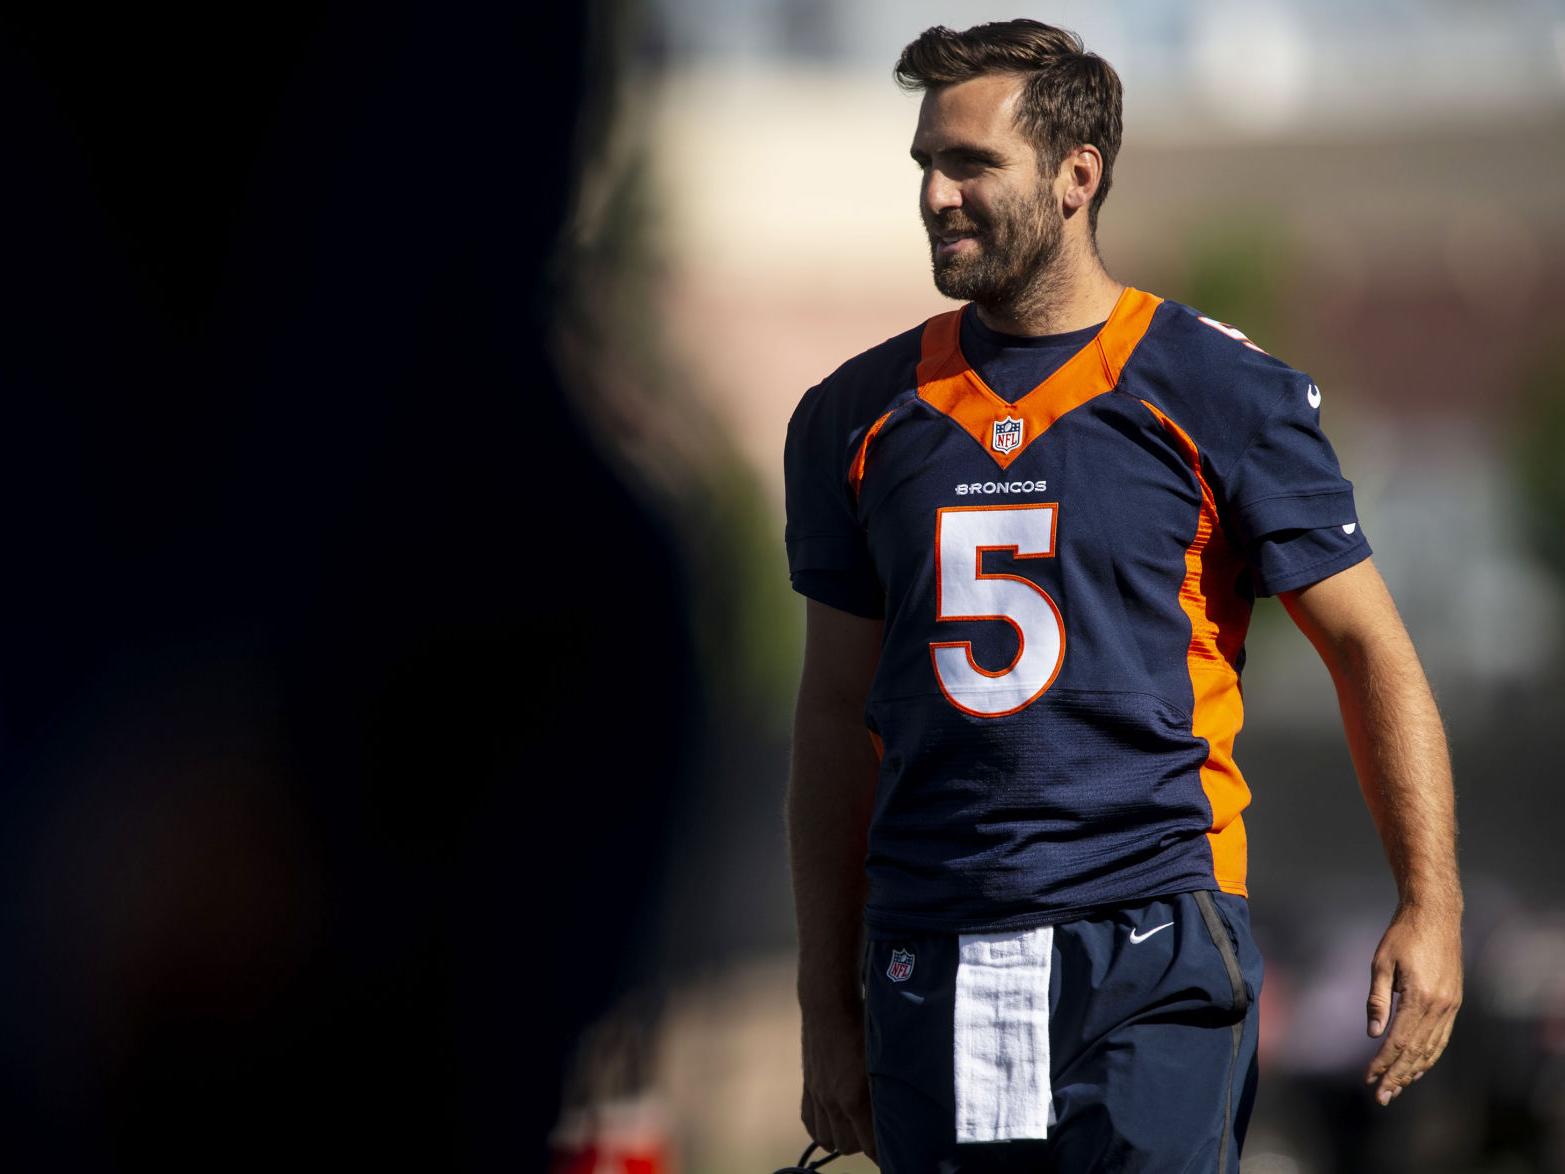 Paul Klee: After Day 1 of Broncos training camp, Joe Flacco's the